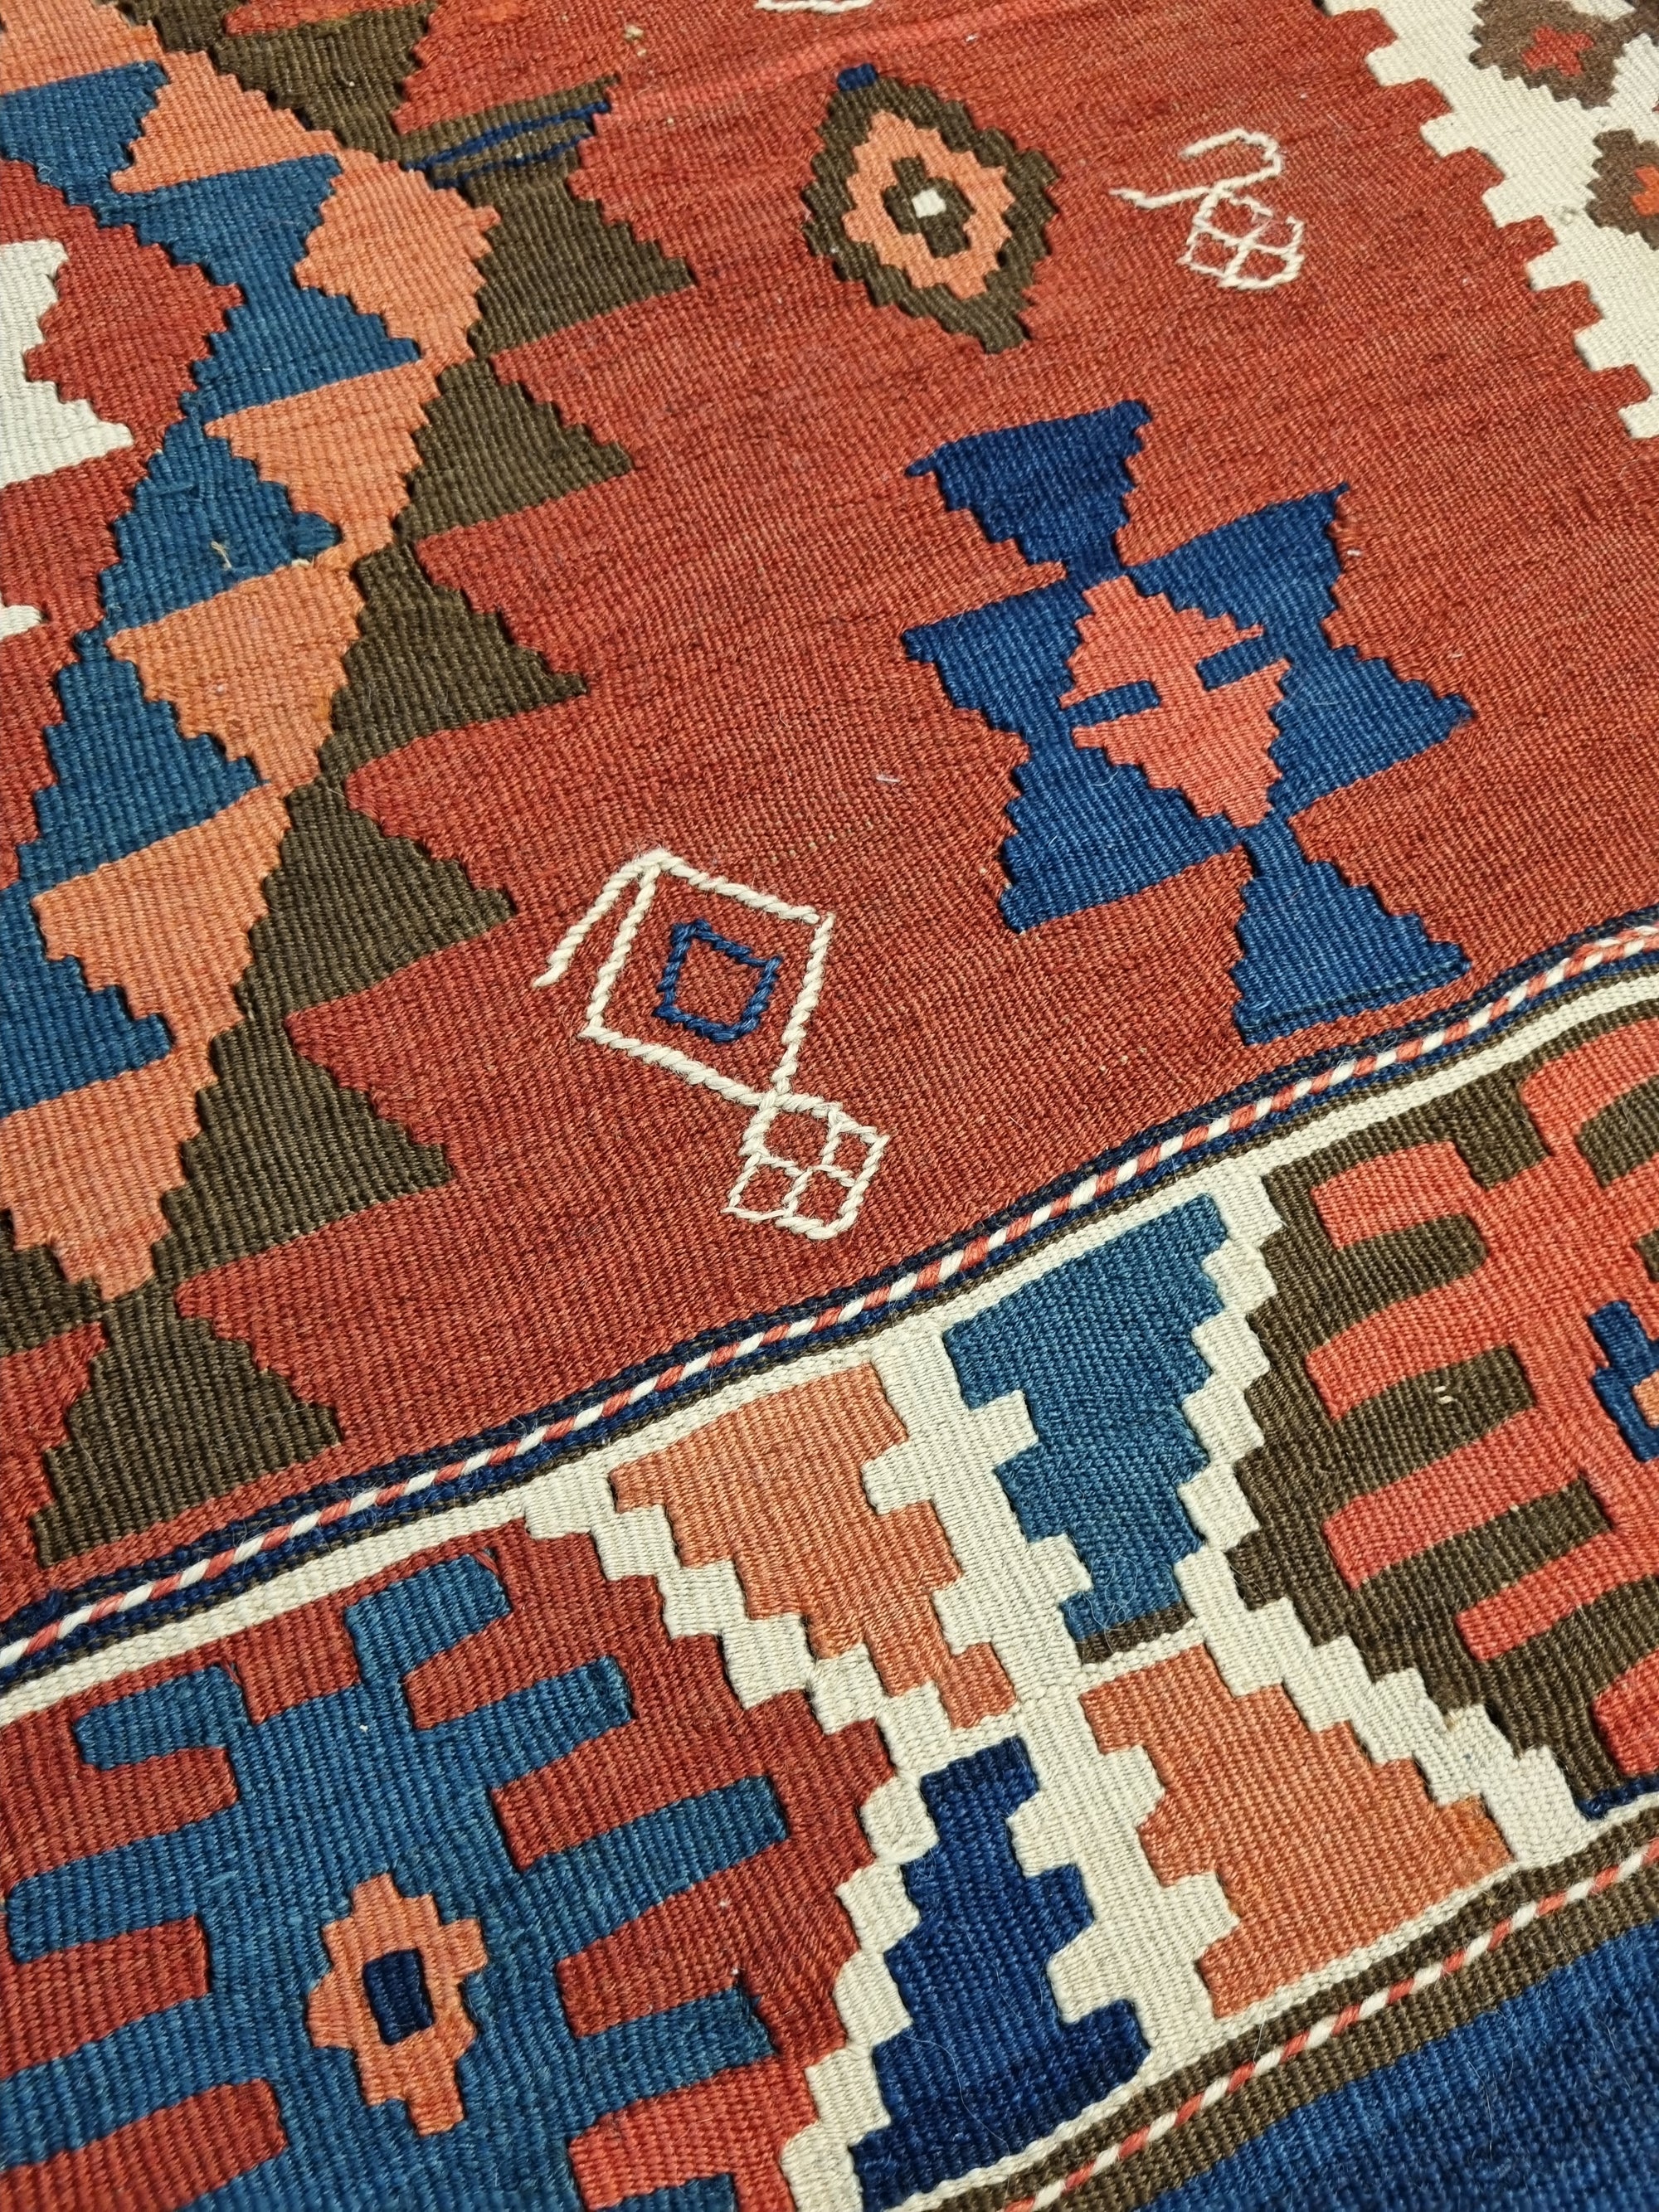 On two of my favourite antique kilims.